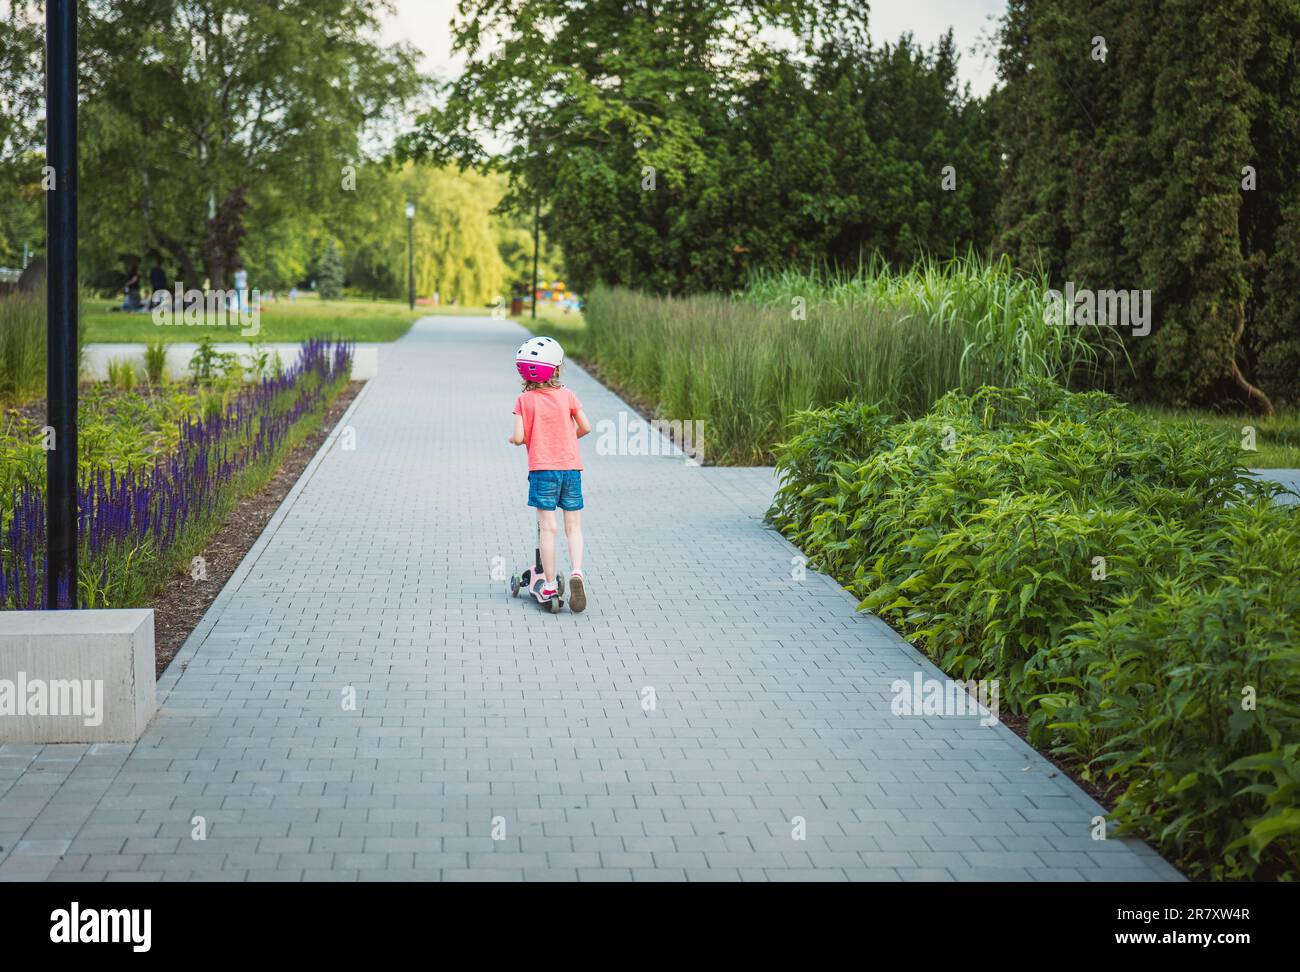 A little girl rides a scooter in a beautiful park full of greenery. Stock Photo